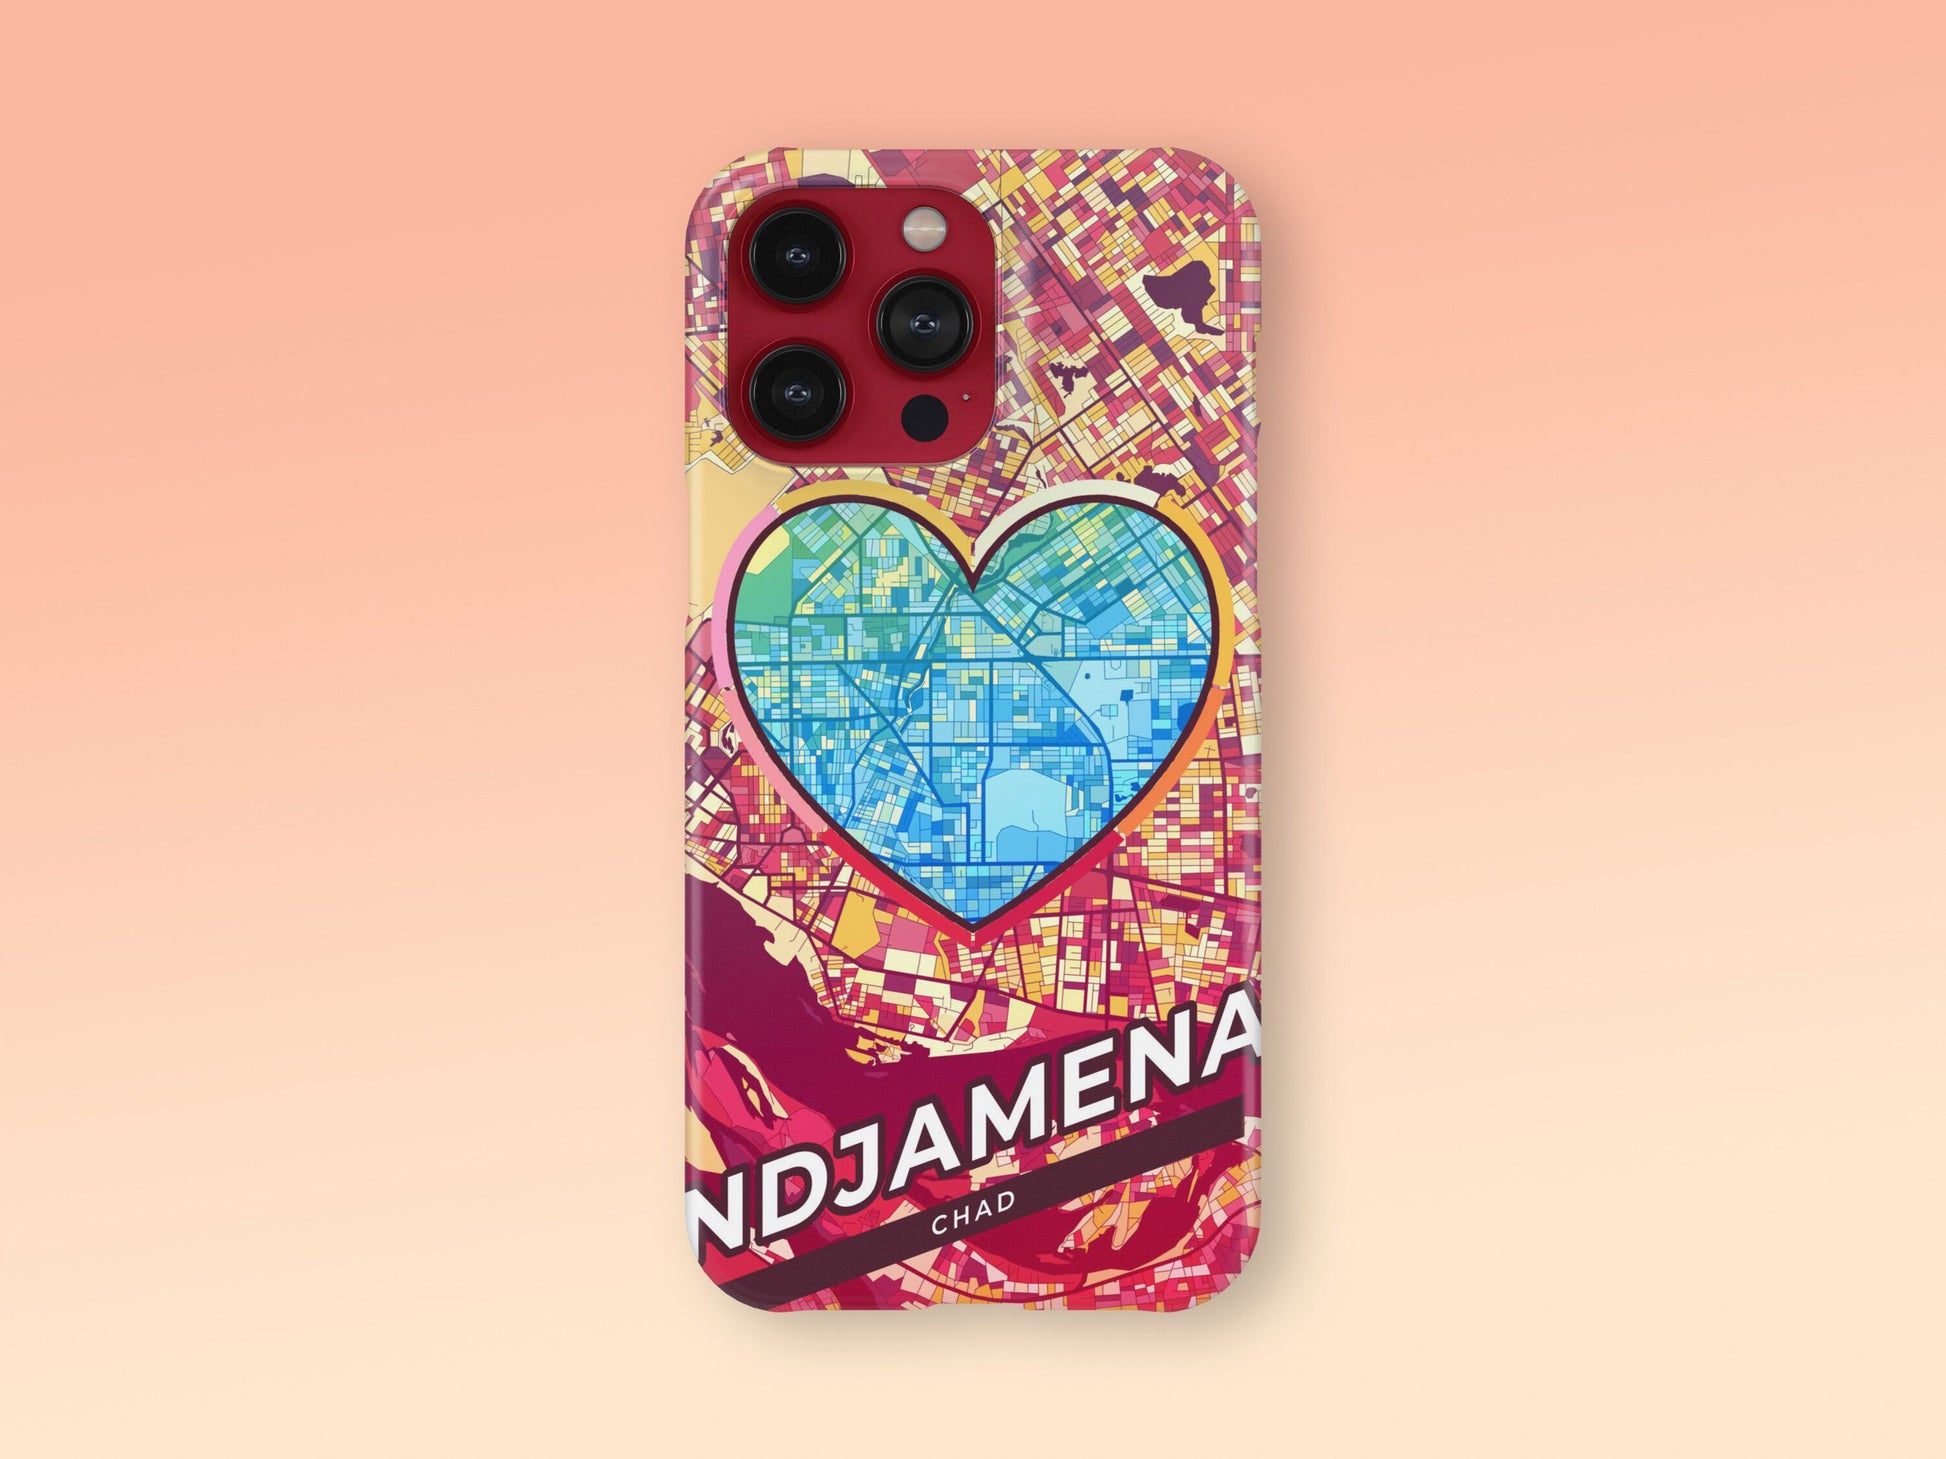 Ndjamena Chad slim phone case with colorful icon. Birthday, wedding or housewarming gift. Couple match cases. 2